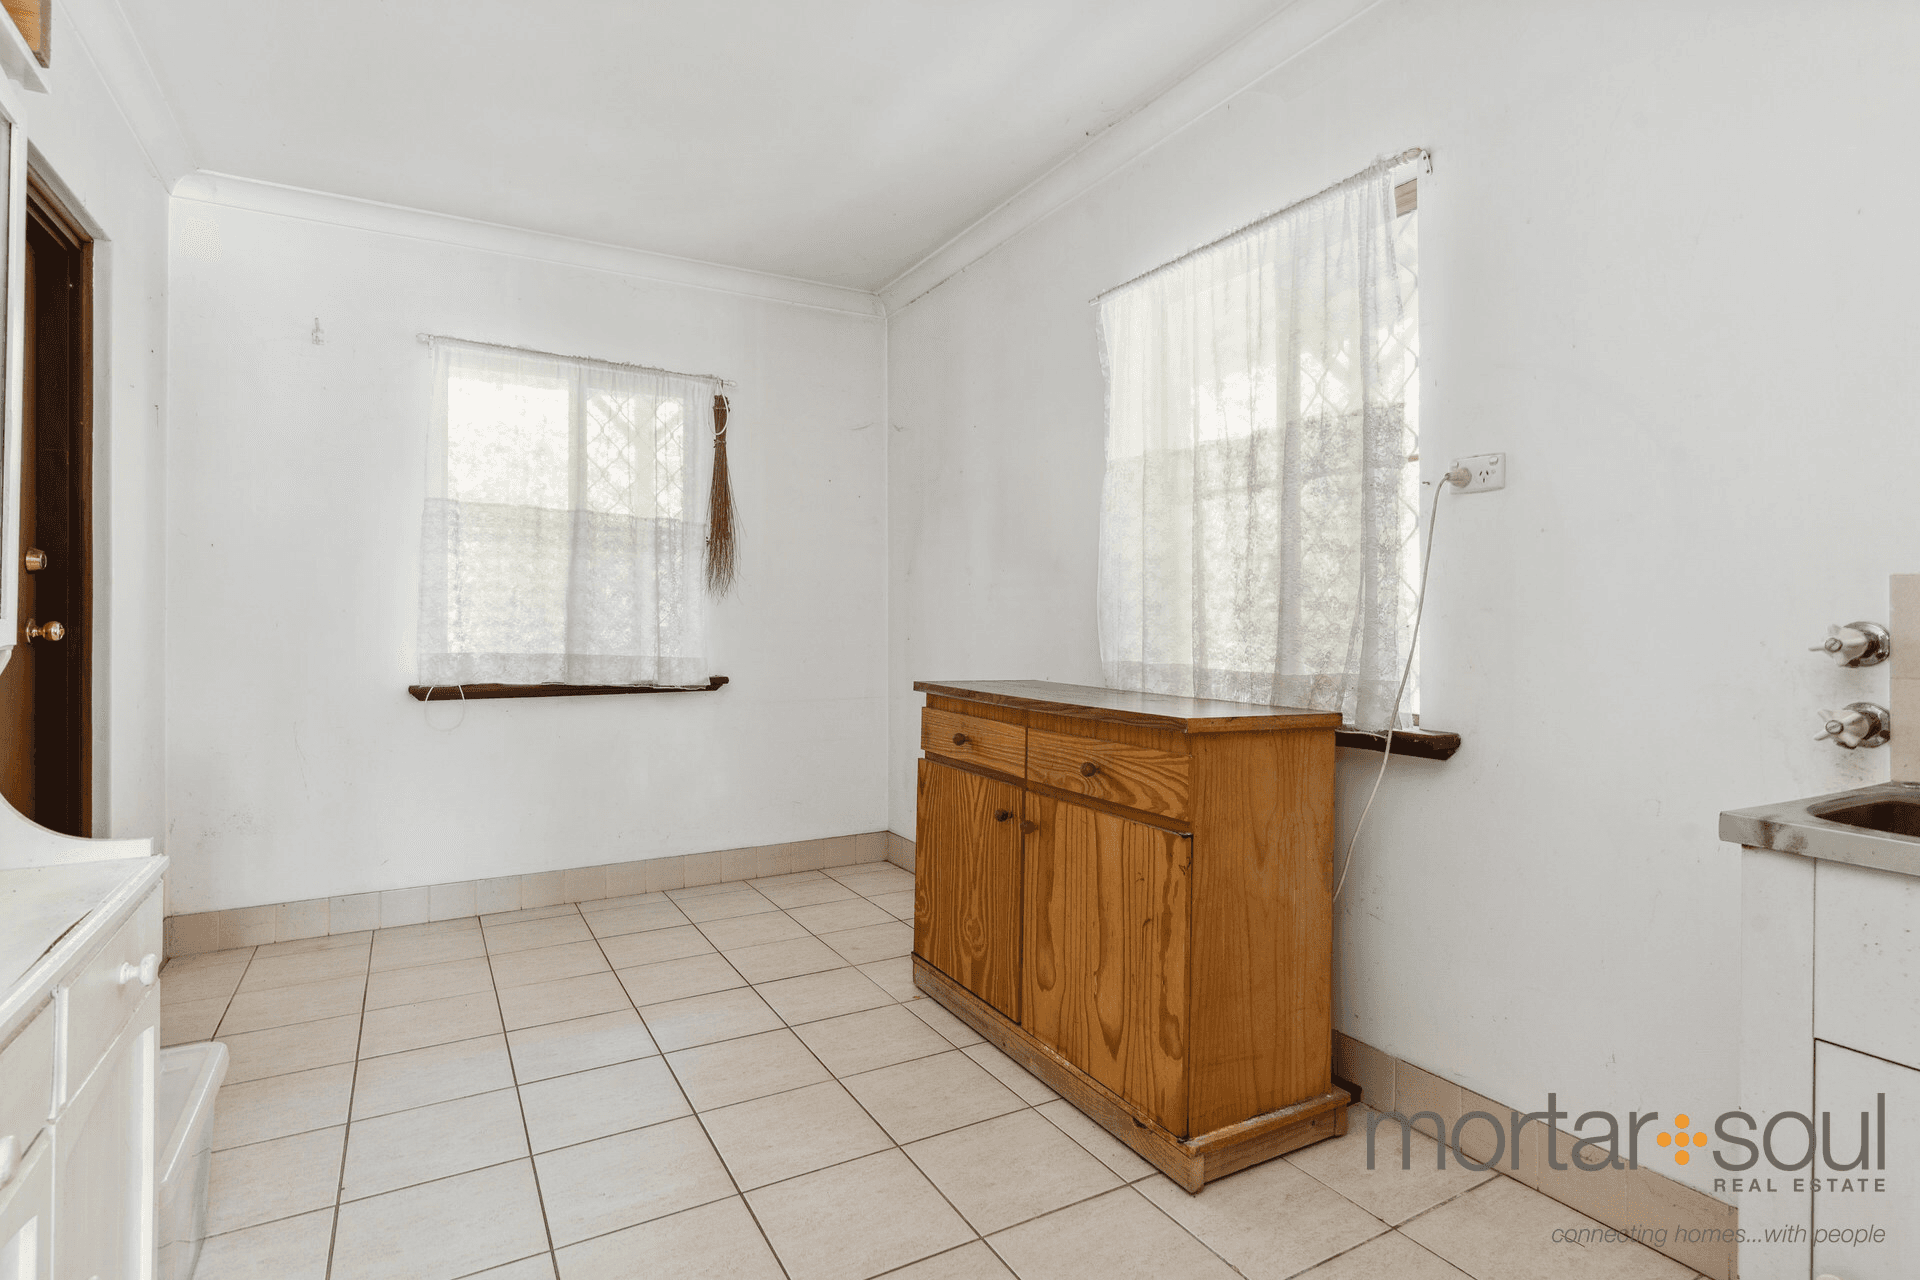 11 And 15 Abbey Rd, Armadale, WA 6112